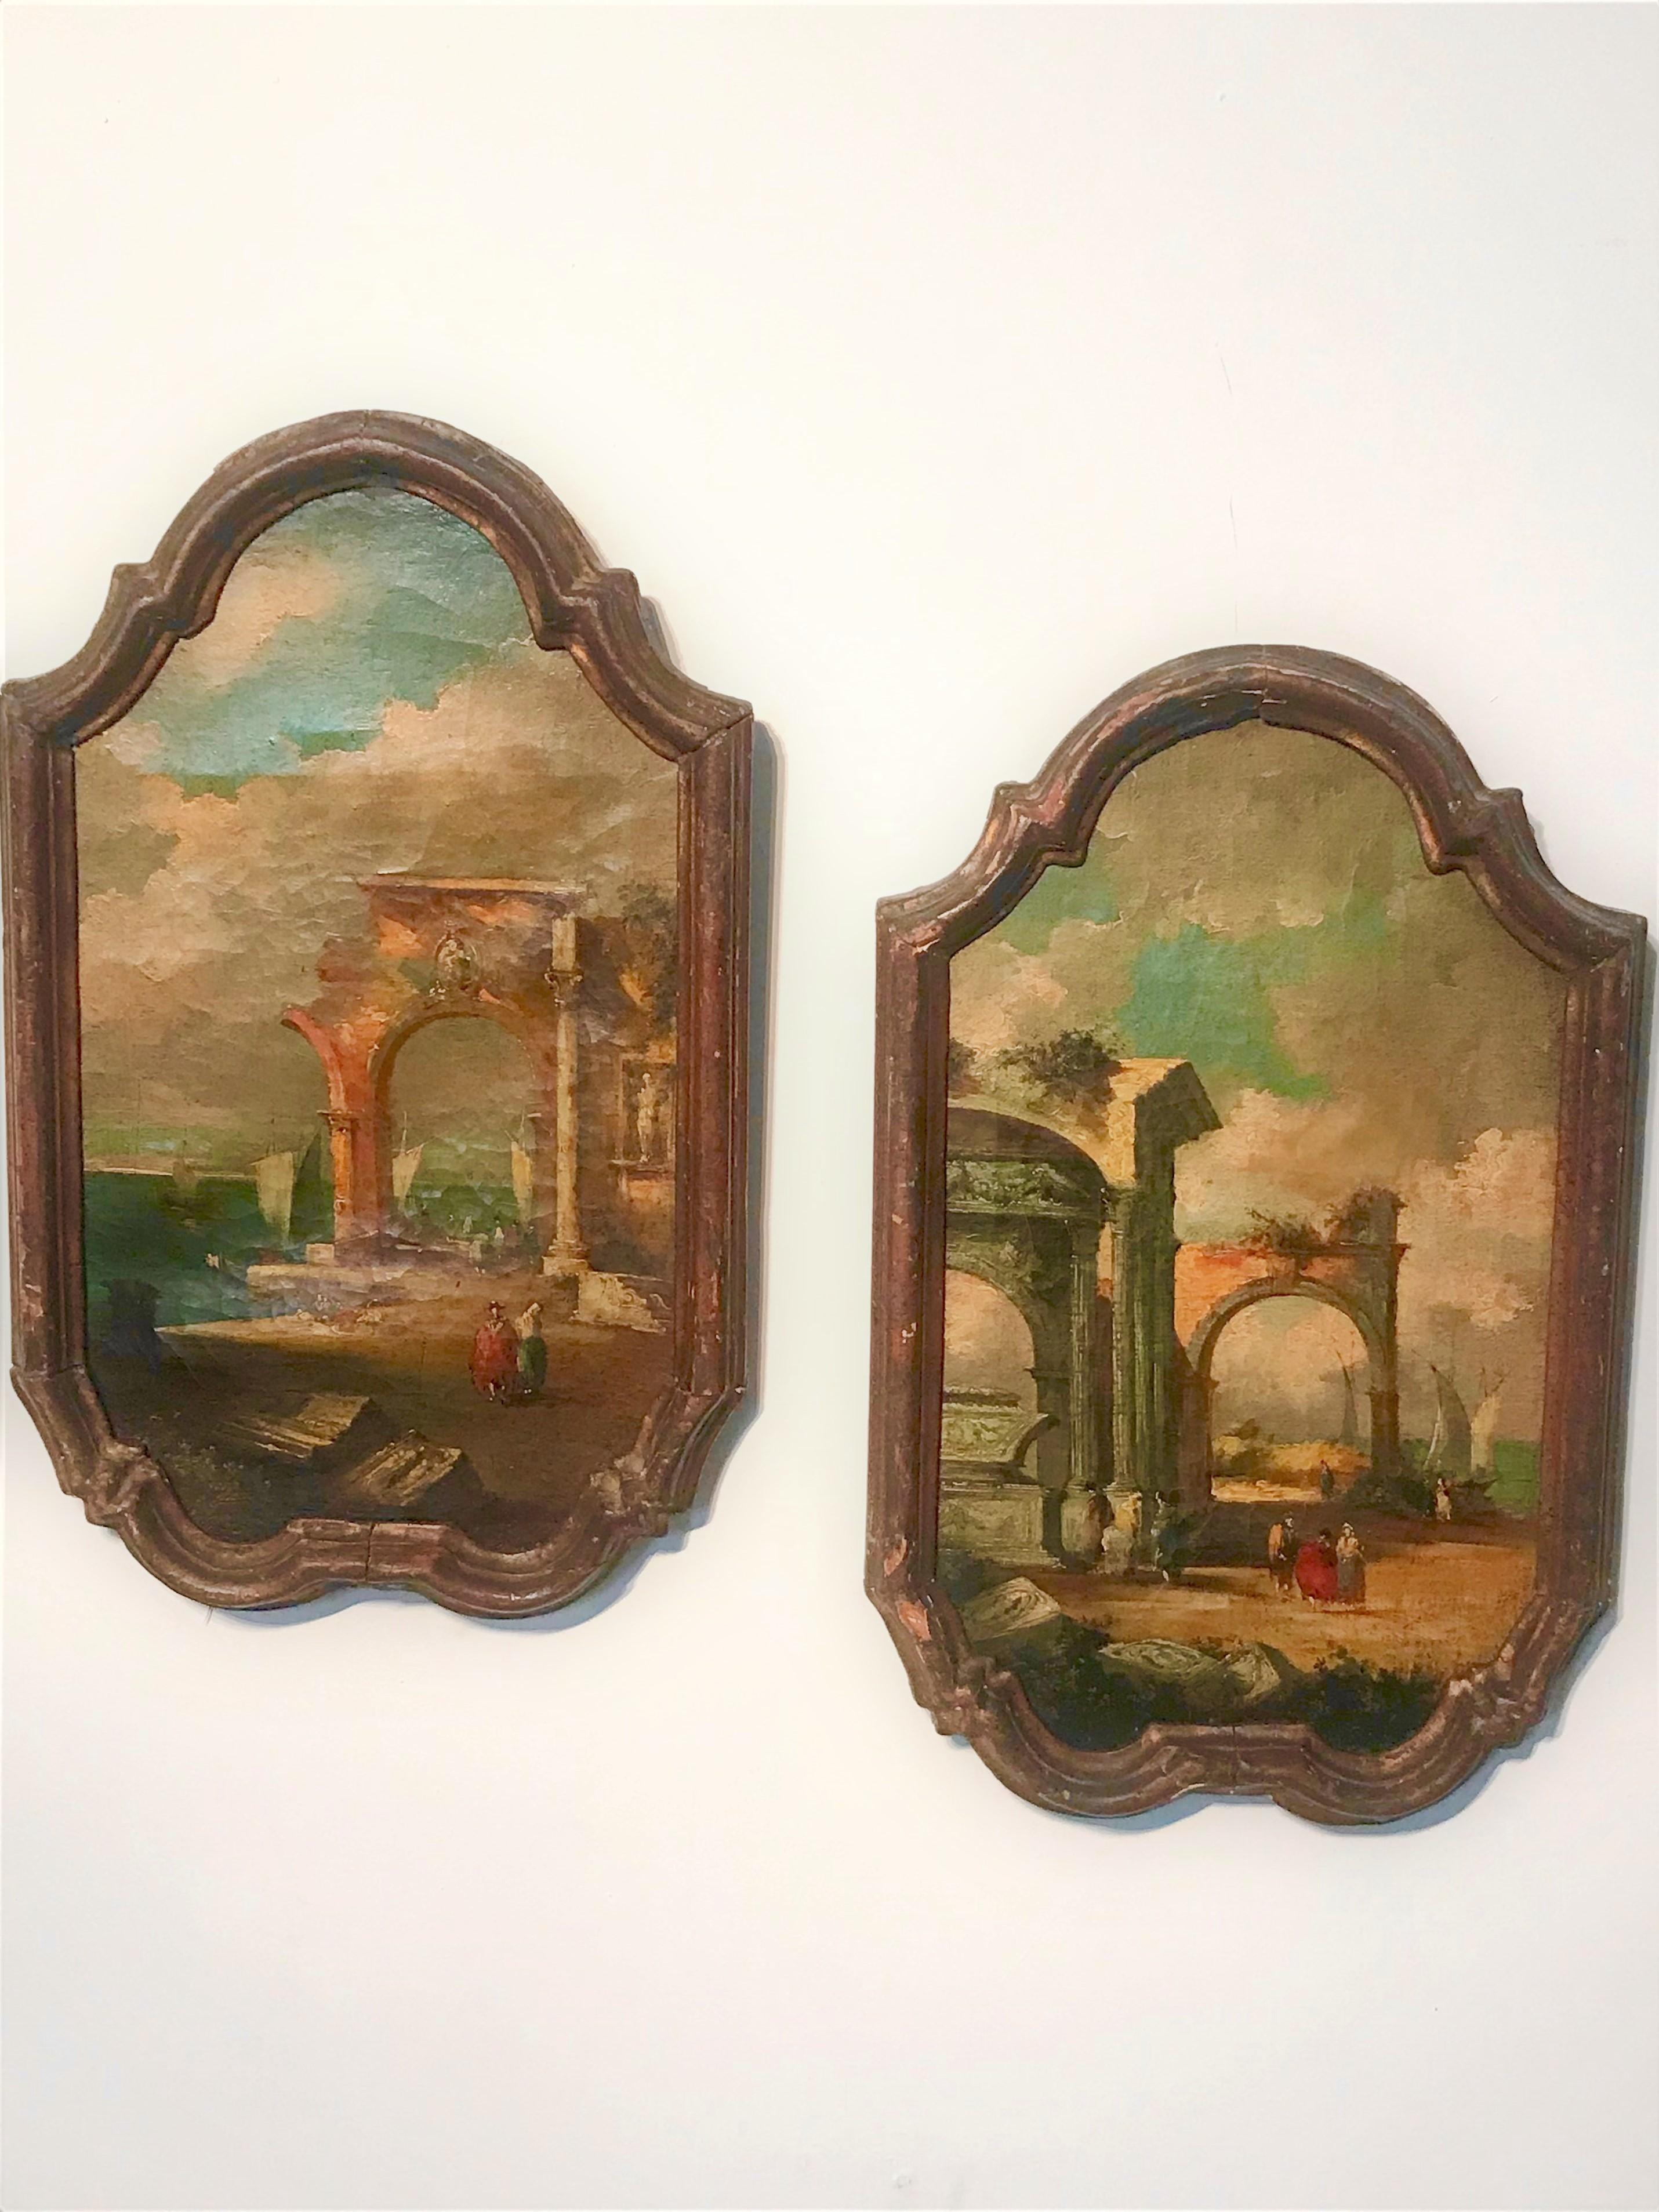 A set of capriccio (or ruins ) after Guardi (the prominent Venetian artist of noble birth ) ,probably executed as a Grand Tour souvenir  from Venice .  Present very well with considerable old world charm. Guardi represents the end of the Venetian